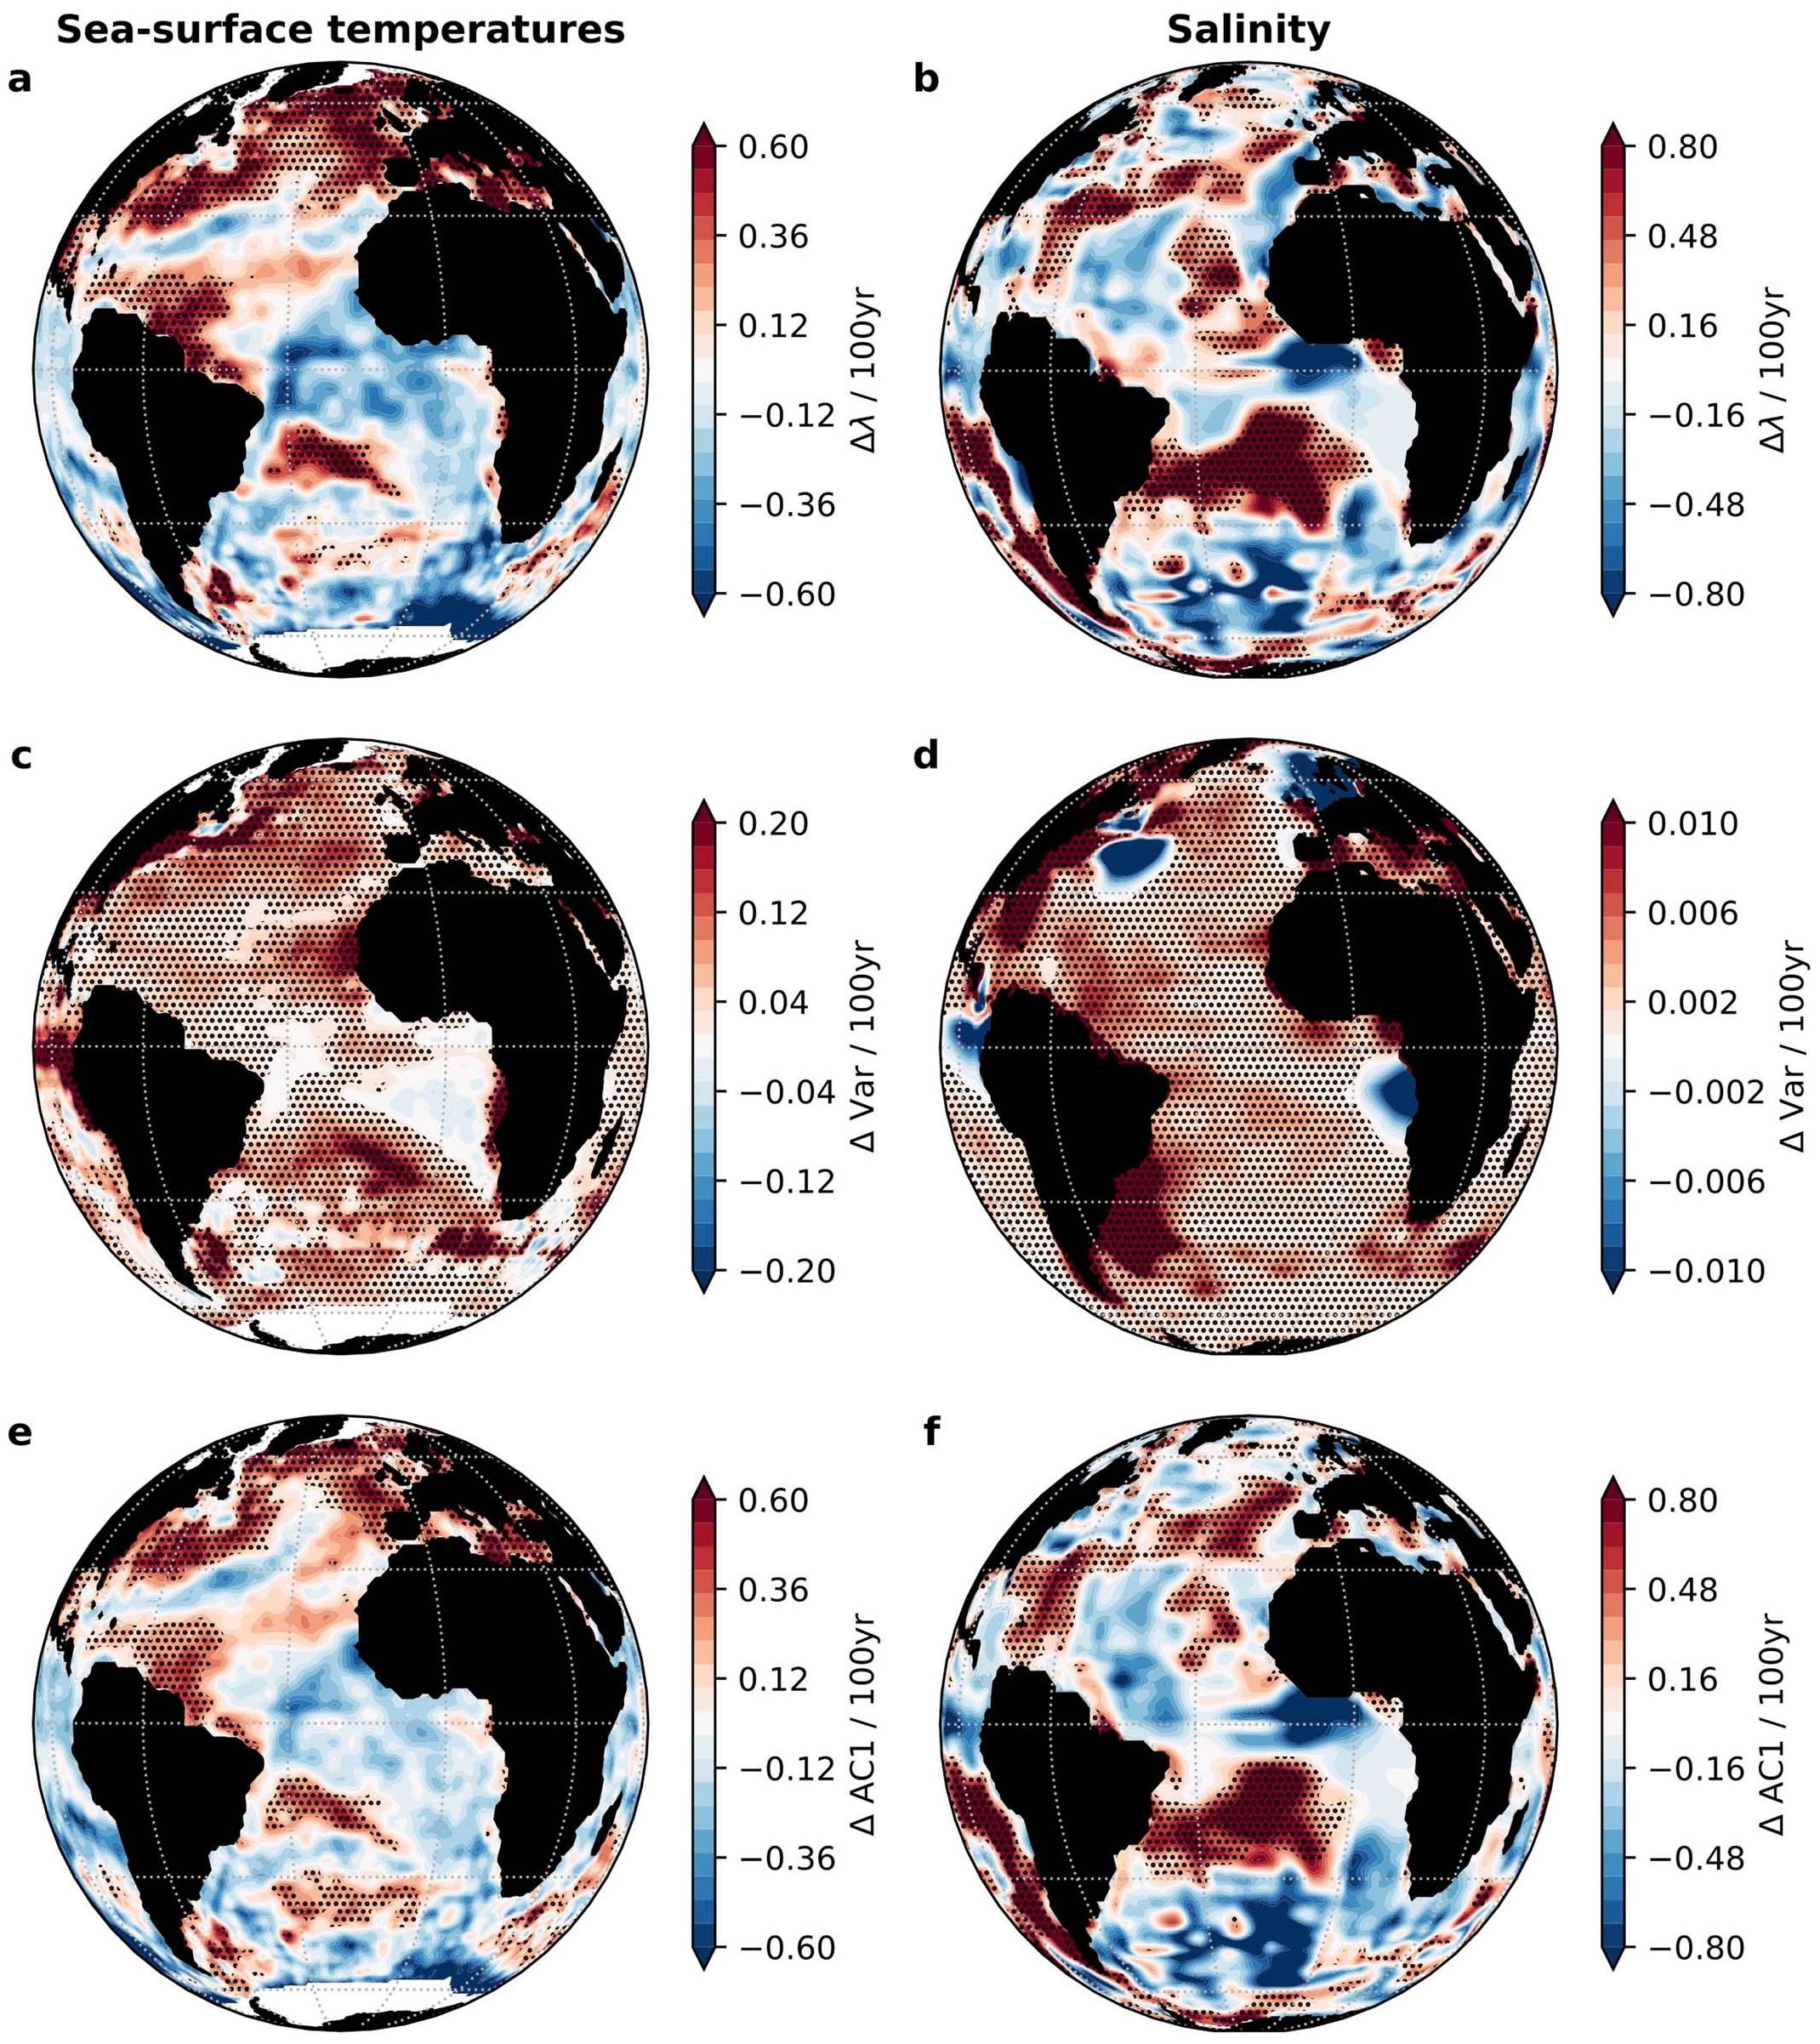 Map showing trends of early-warning indicators of Atlantic Meridional Overturning Circulation (AMOC) collapse. a, Linear trends of the corrected restoring rate λ estimated from the HadISST dataset assuming autocorrelated noise. b, Same as (a) but for the EN4 salinity dataset. c, Linear trends of the variance estimated from the HadISST dataset. d, Same as (c) but for the EN4 salinity dataset. e, Linear trends of the AC1 estimated from the HadISST dataset. f, Same as (e) but for the EN4 salinity dataset. Note the high positive values in the northern Atlantic and the subpolar gyre region in particular for λ and AC1, but also in the southern Atlantic ocean where a salinity pileup has recently been associated with an AMOC slowdown. Graphic: Boers, 2021 / Nature Climate Change